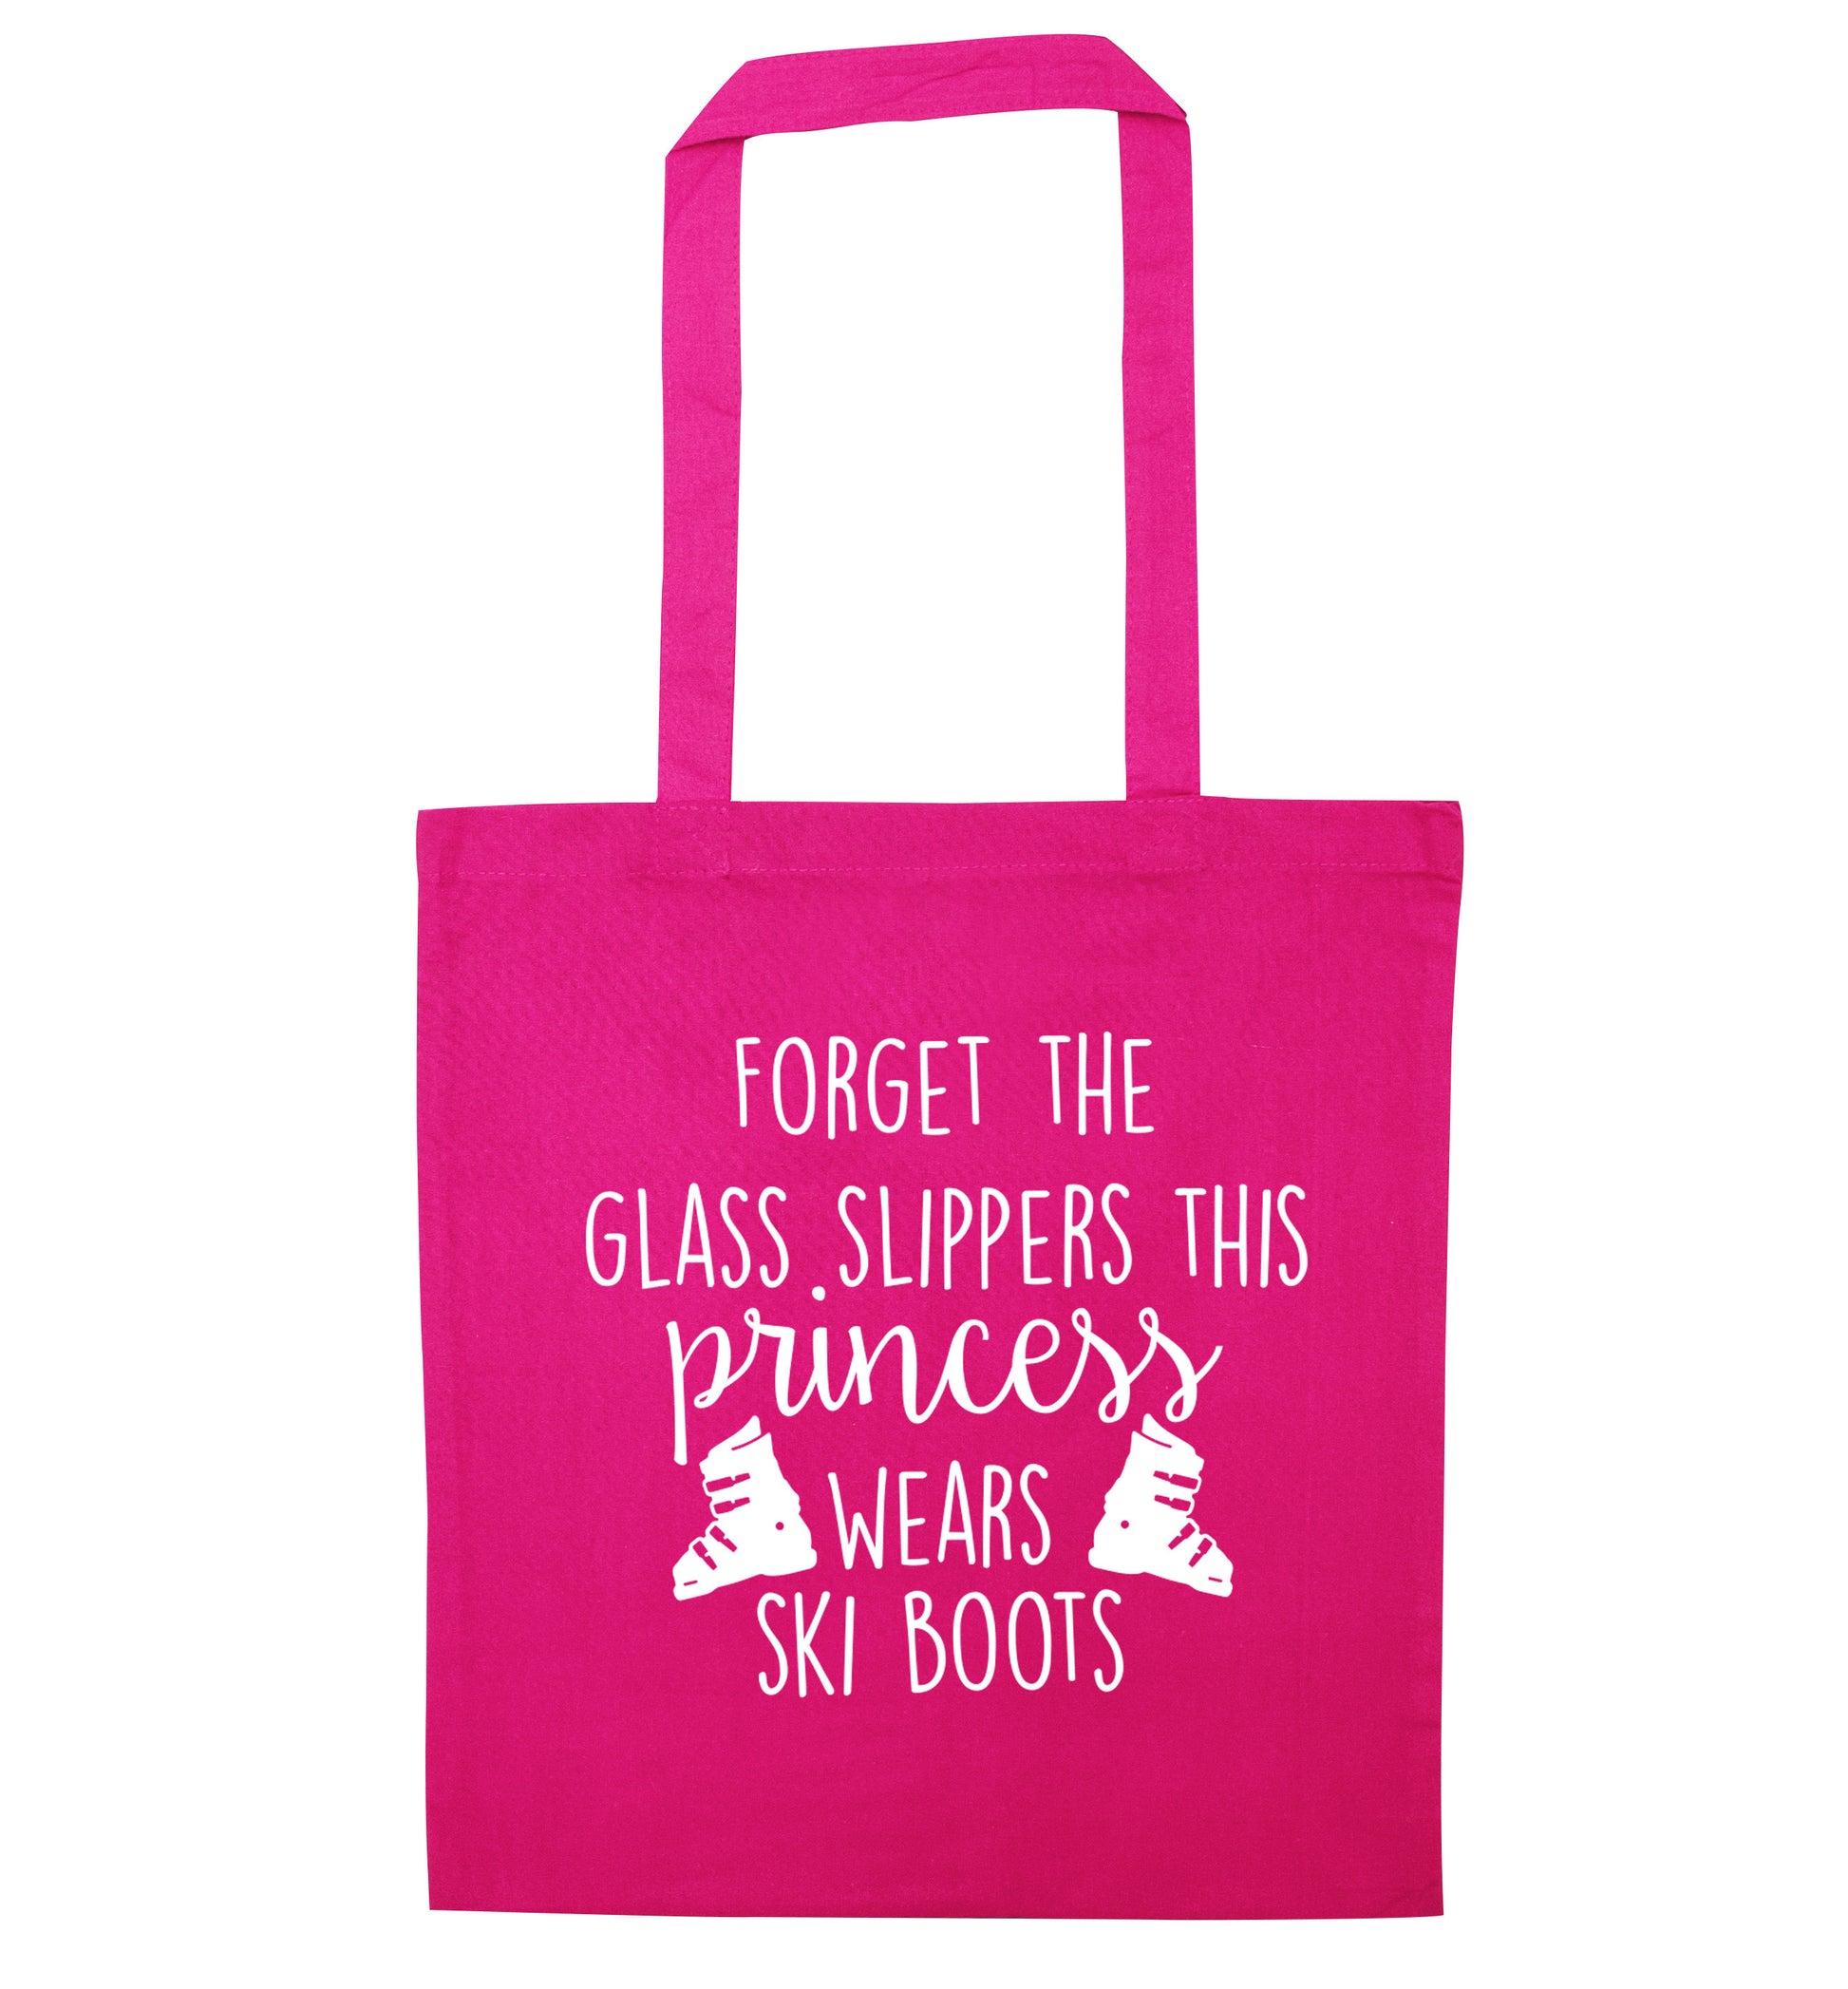 Forget the glass slippers this princess wears ski boots pink tote bag